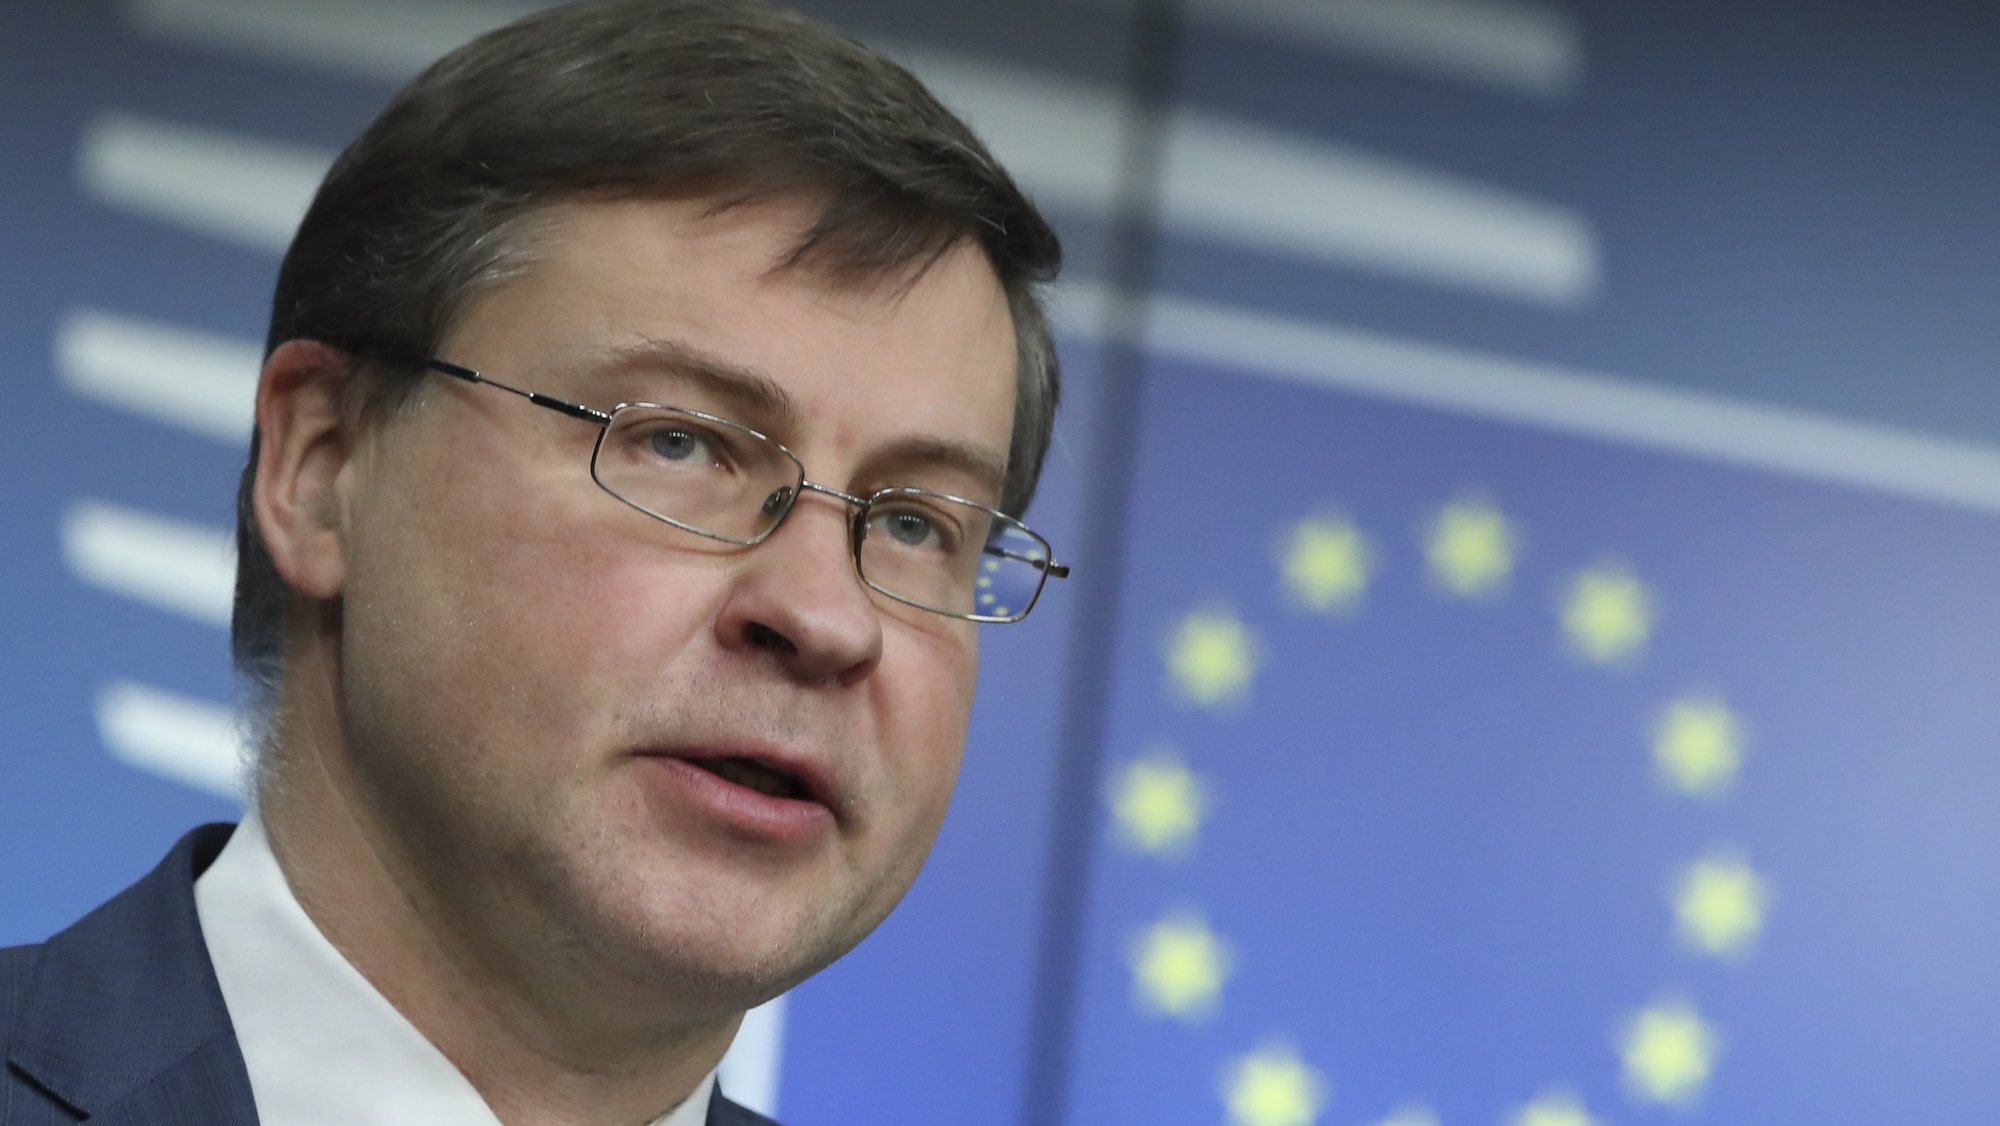 epa09077910 European Commission Vice-President Valdis Dombrovskis speaks during a news conference following a European Union finance ministers meeting in Brussels, Belgium, 16 March 2021.  EPA/YVES HERMAN / POOL